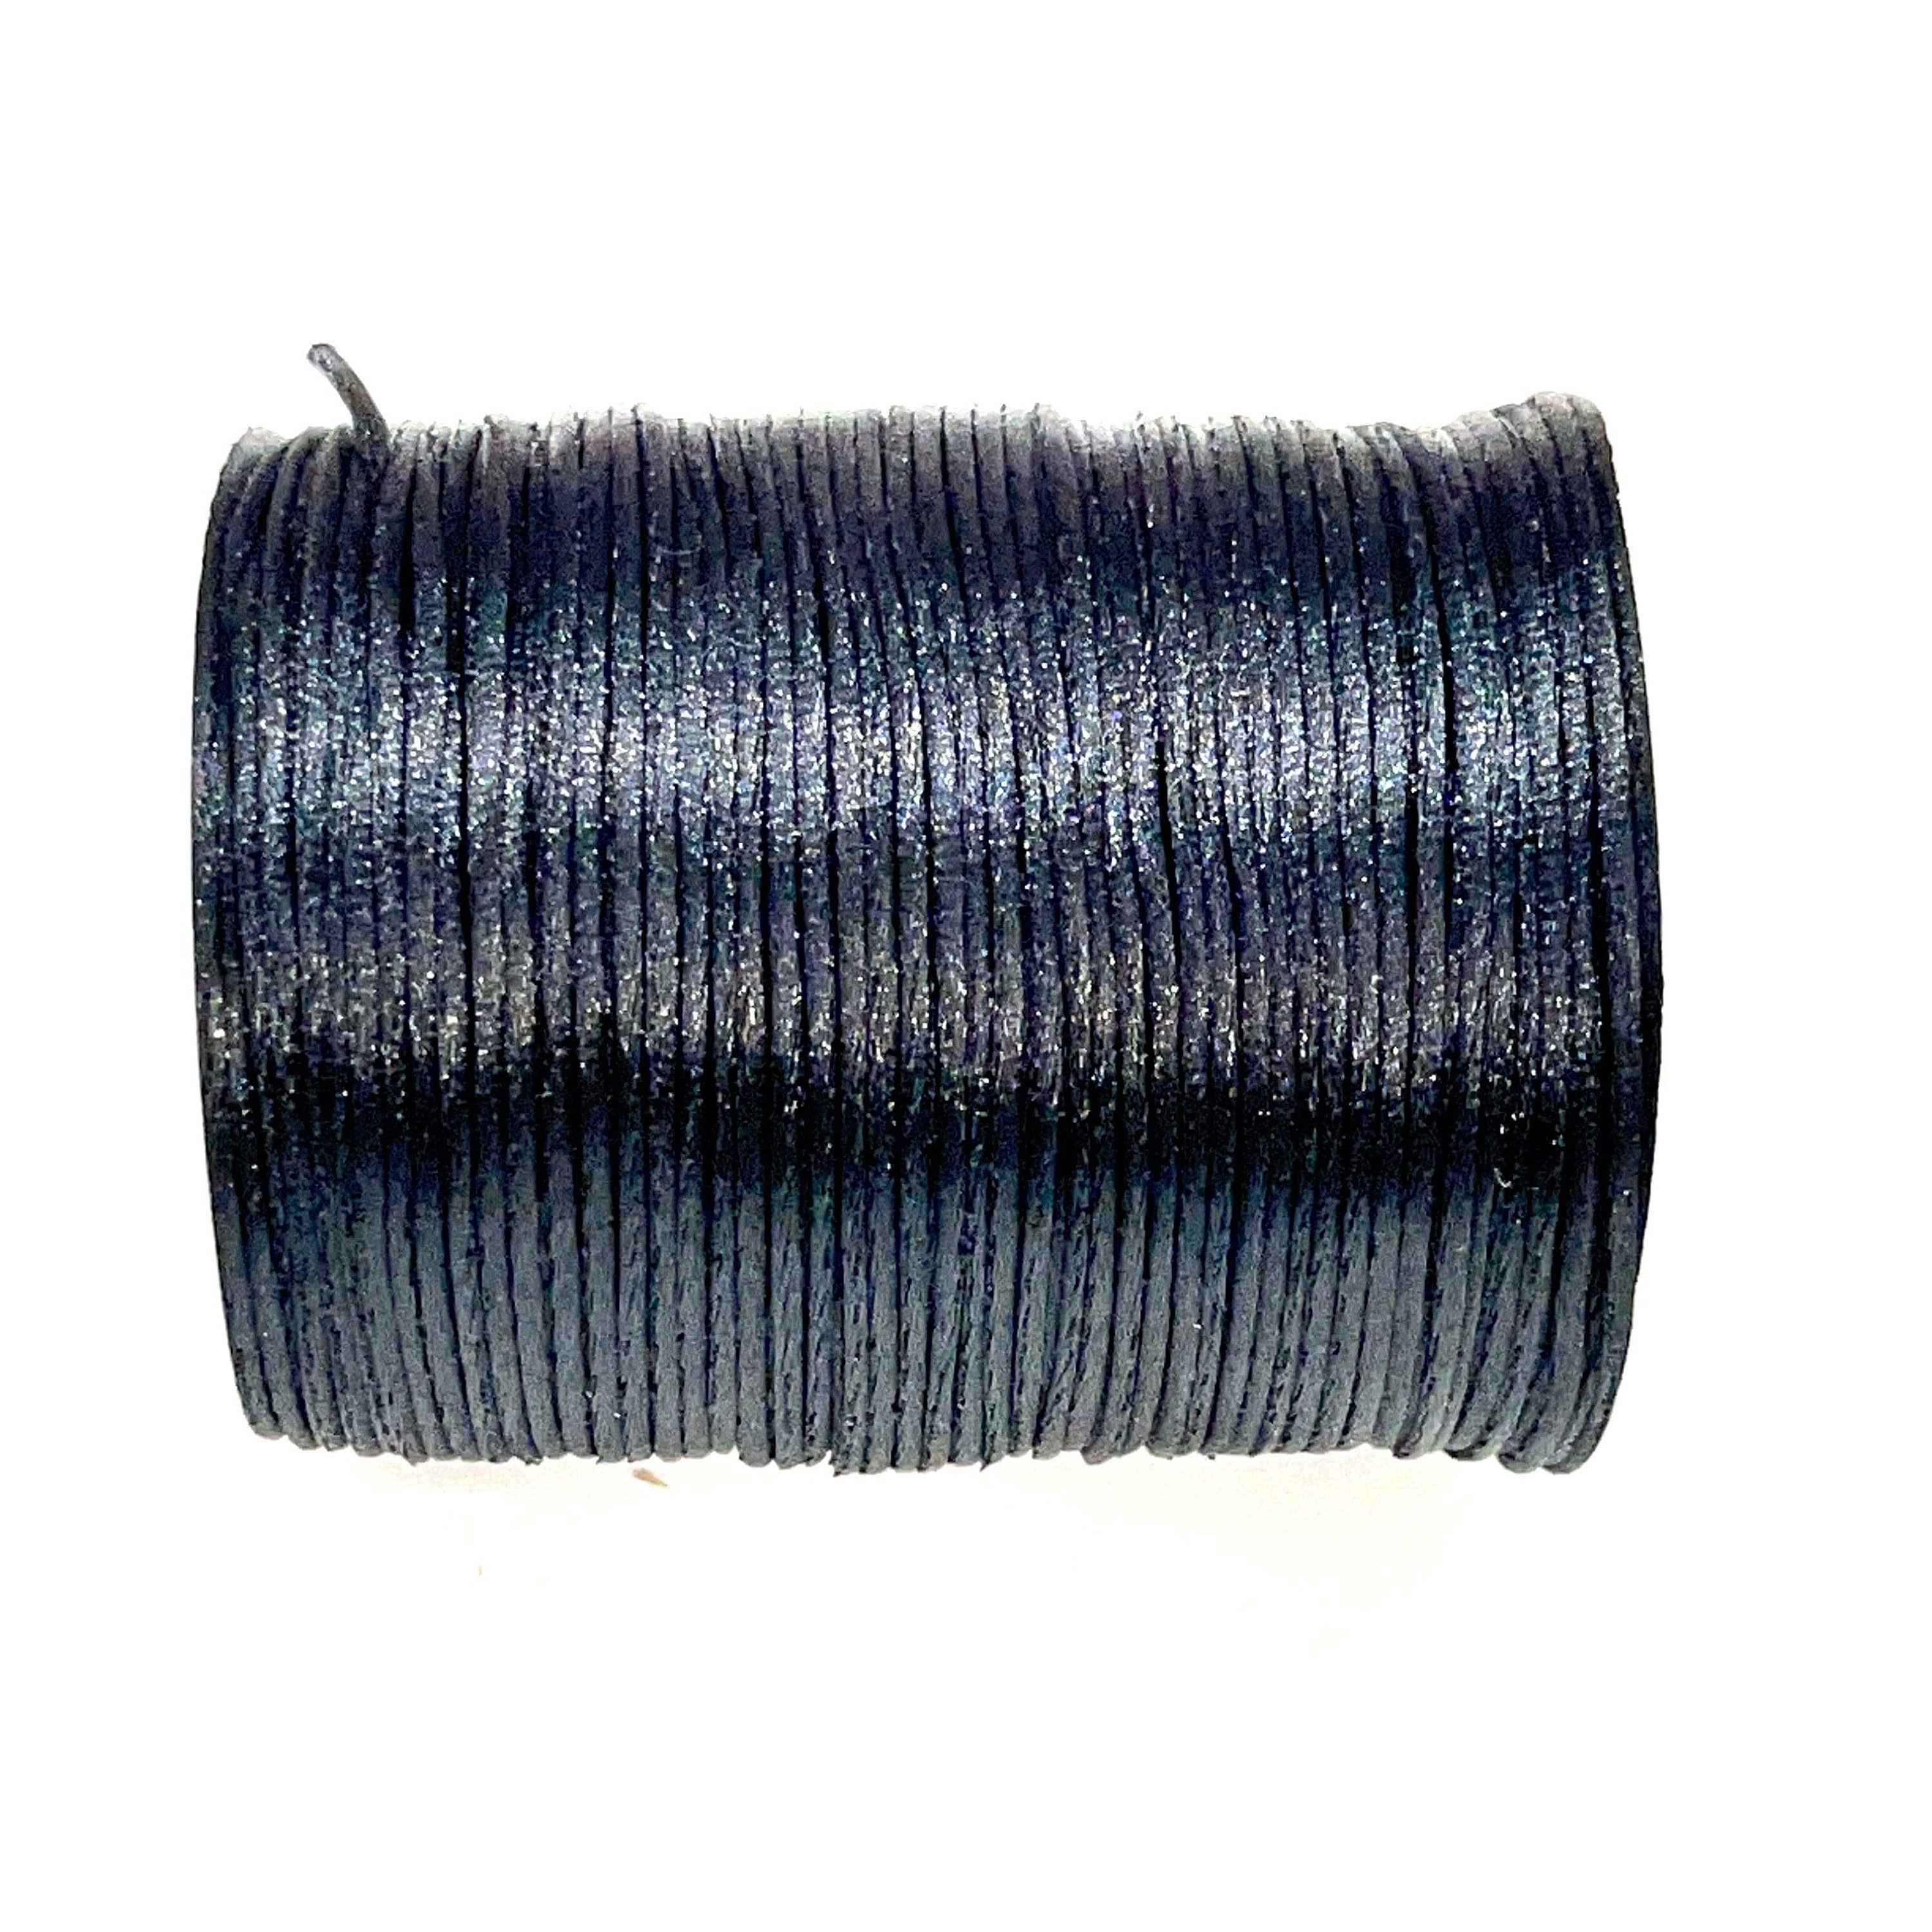 INSPIRELLE 3mm Black Satin Cord Rattail Silk Cord Chinese Knot Thread for  Jewelry Making, 50 Yards Spool